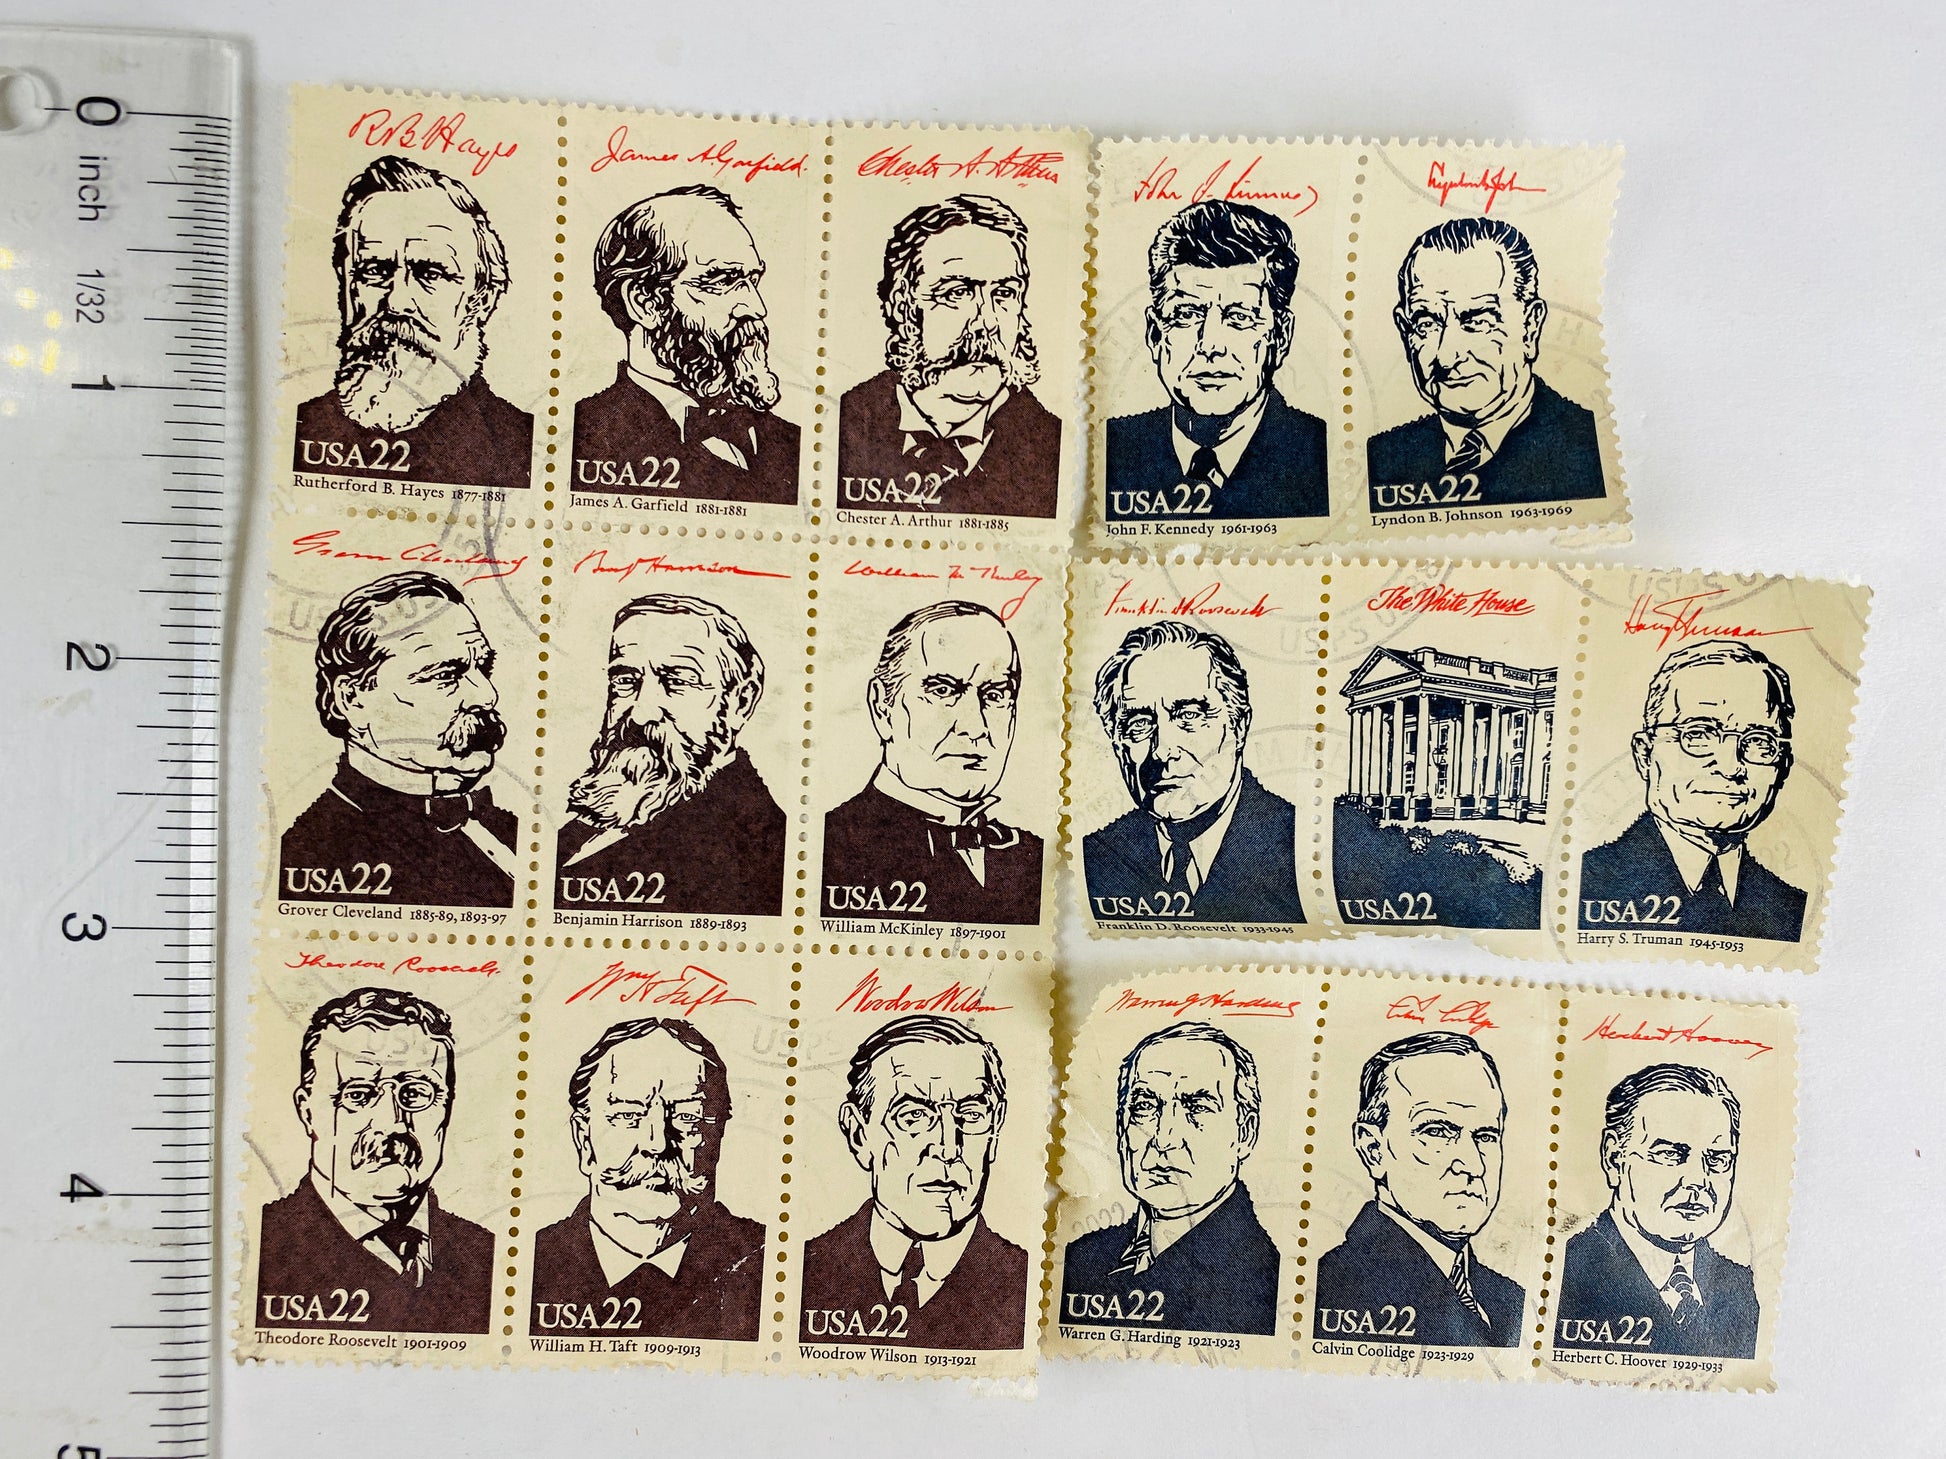 Lot of 17 commemorative stamps depicting a US President and the White House circa 1986 USED postage